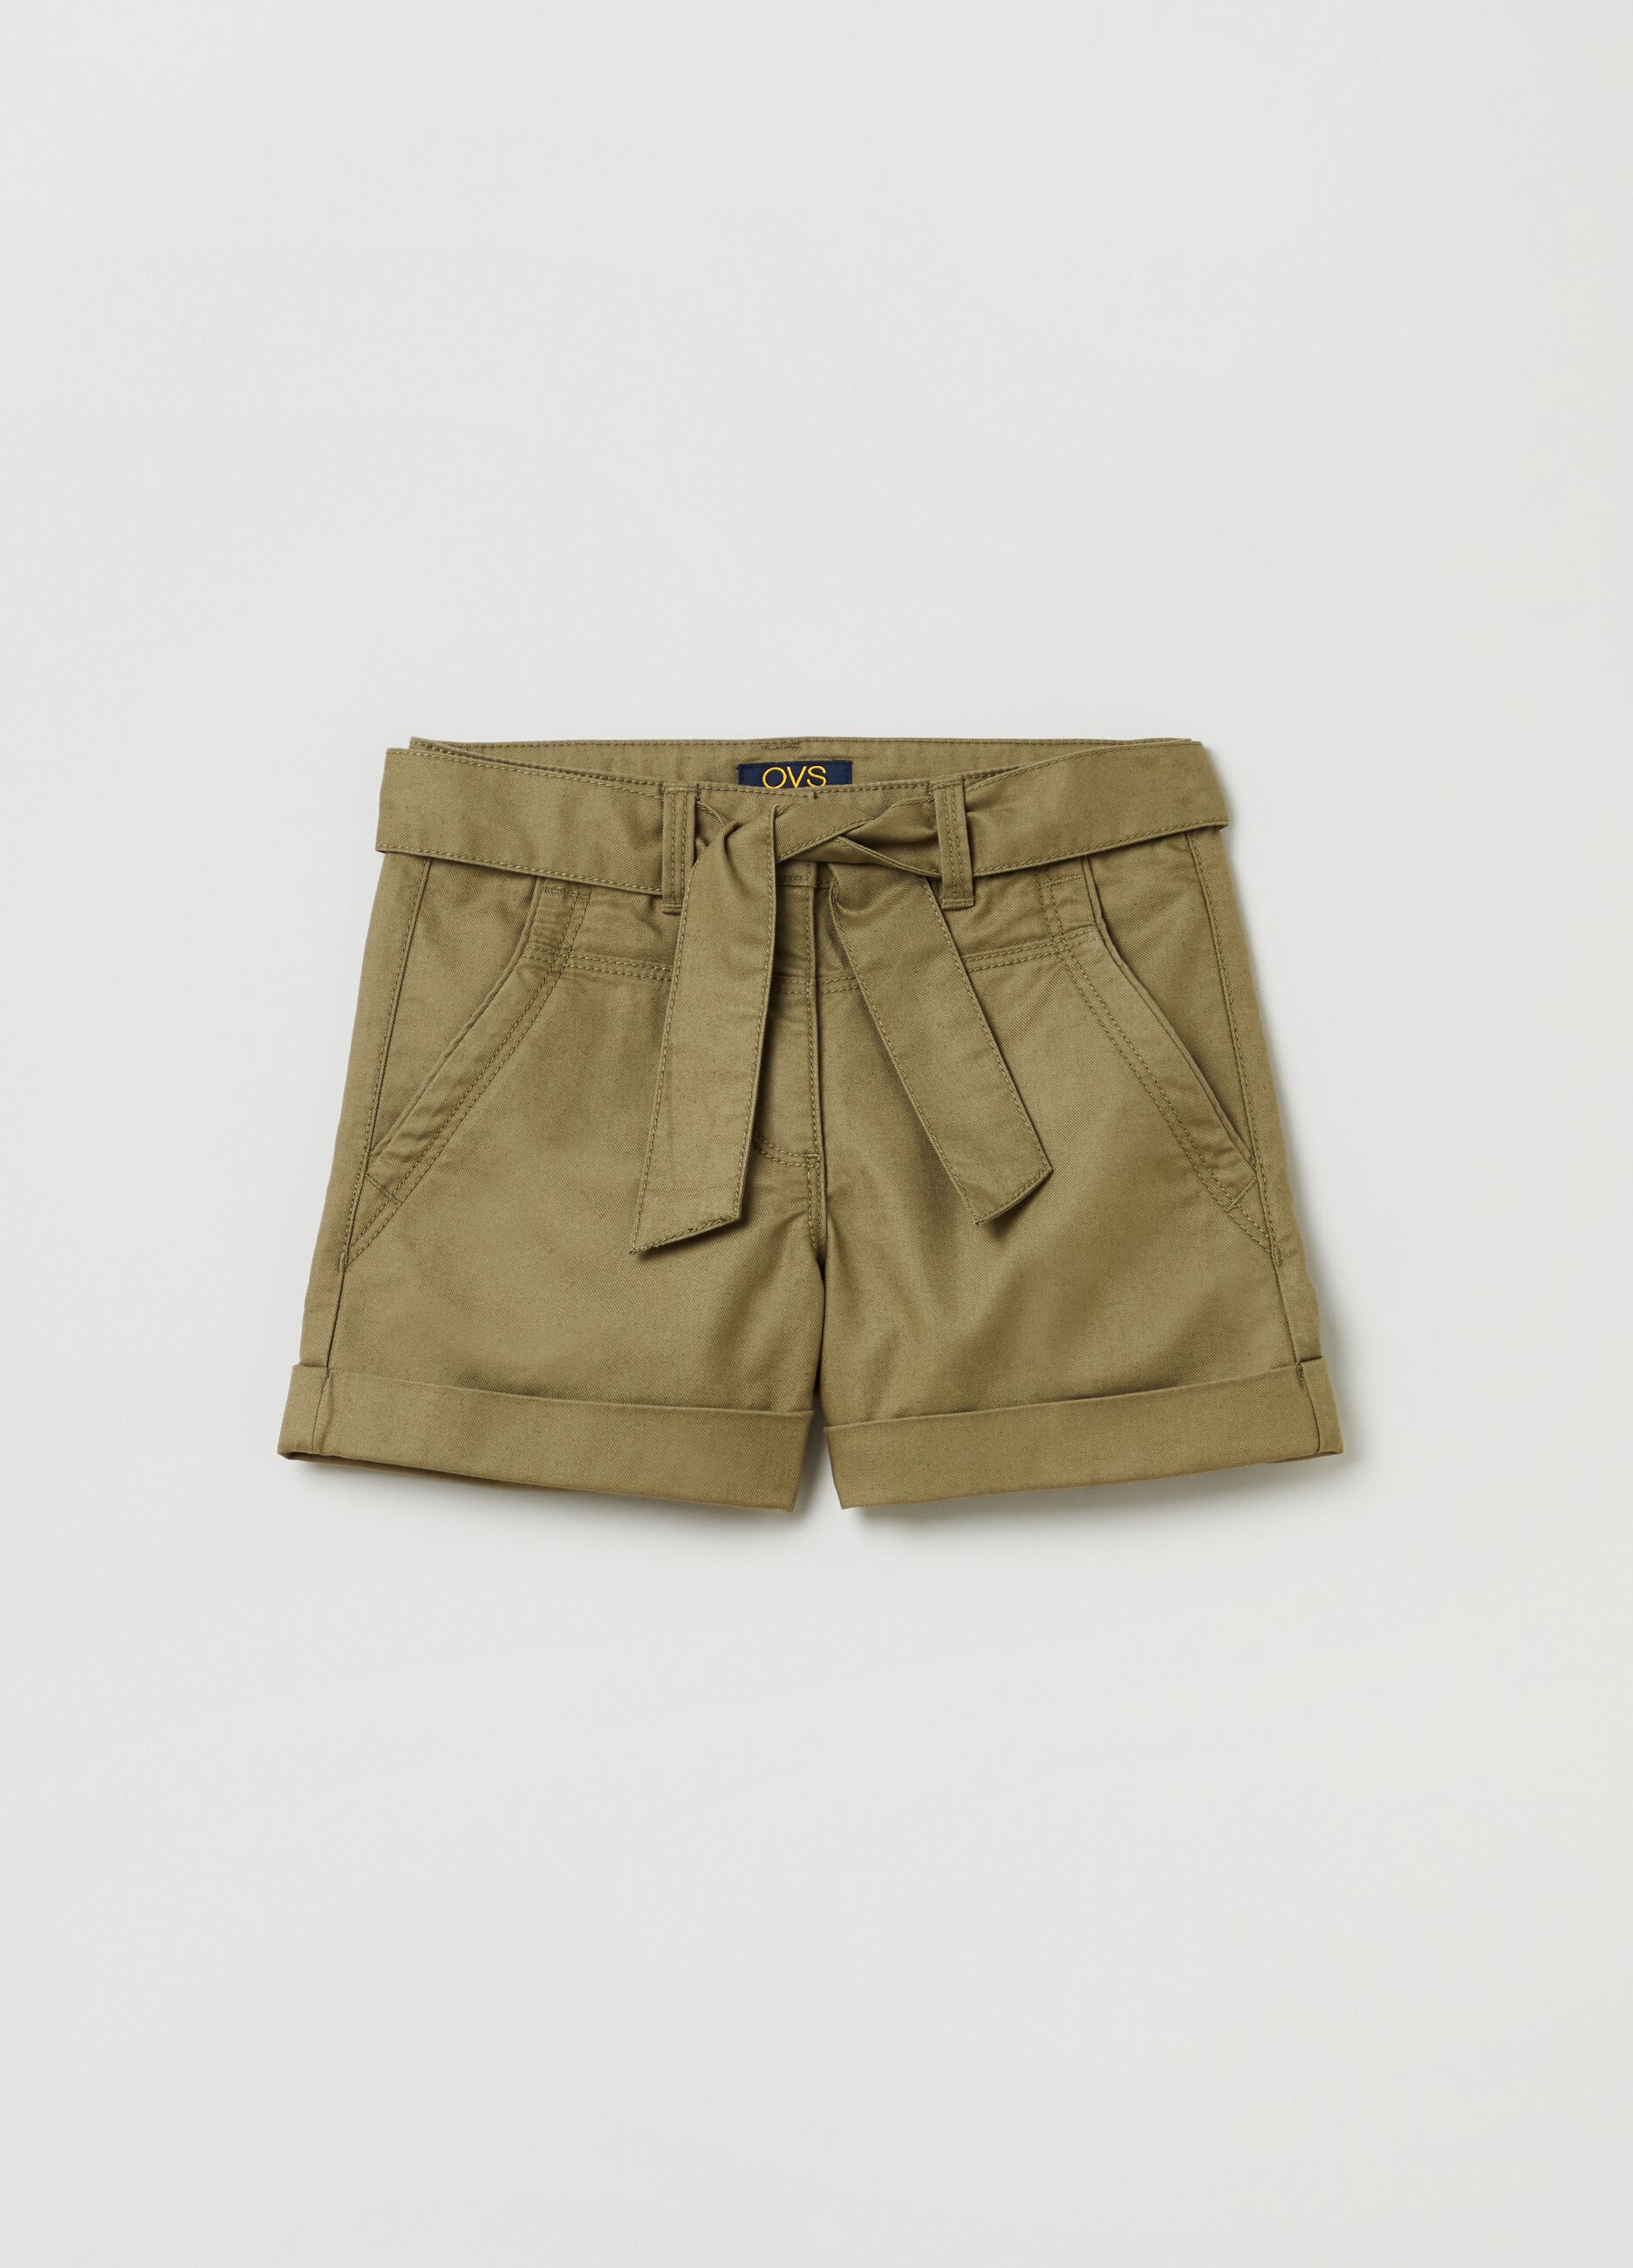 Shorts in cotton and Lyocell with belt